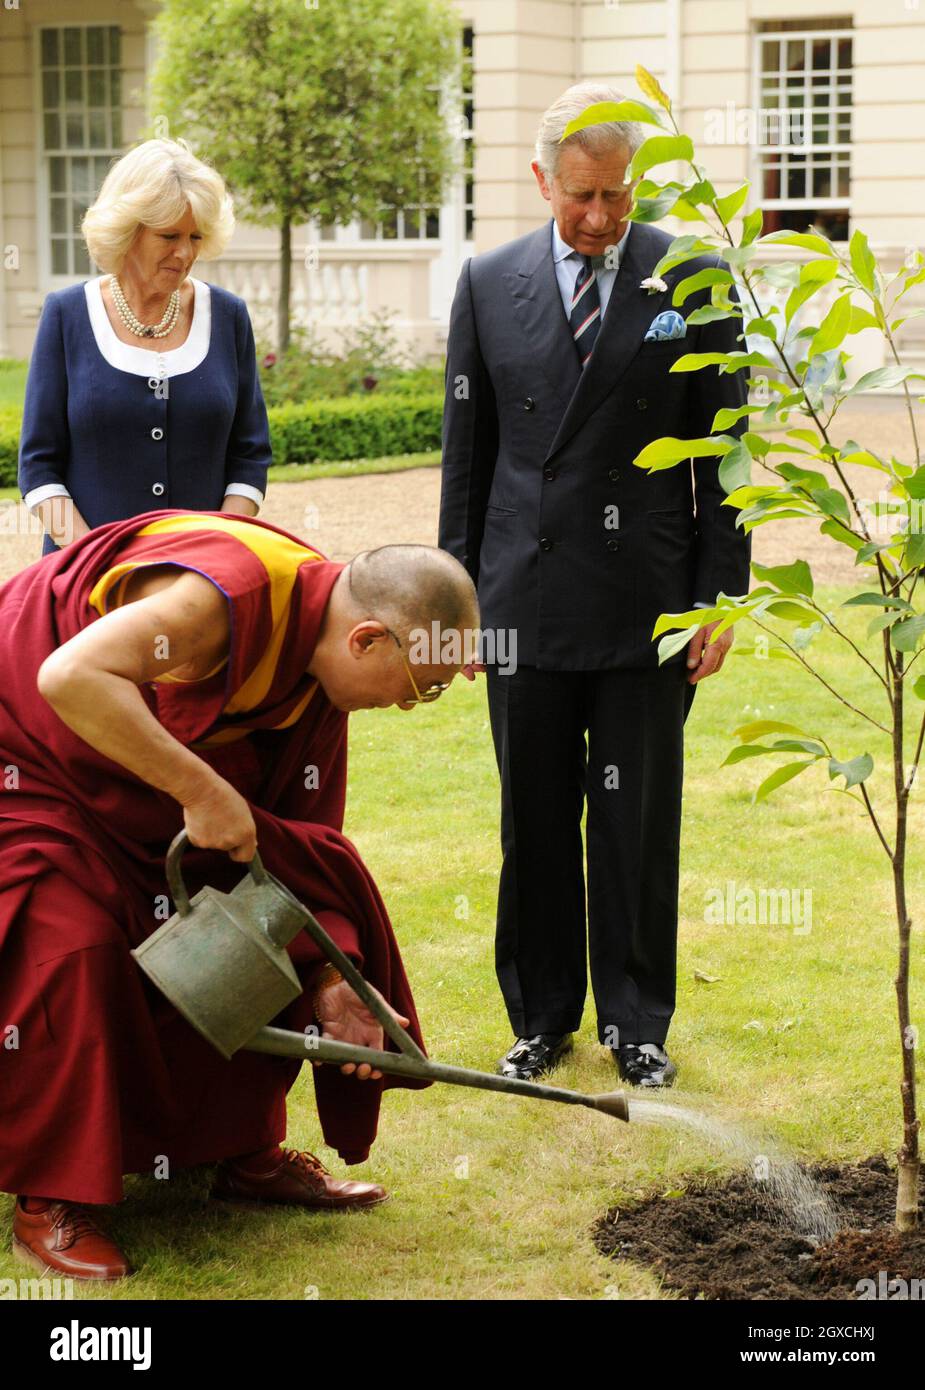 The Dalai Lama plants a tree at Clarence House watched by Prince Charles, Prince of Wales and Camilla, Duchess of Cornwall in London. Stock Photo